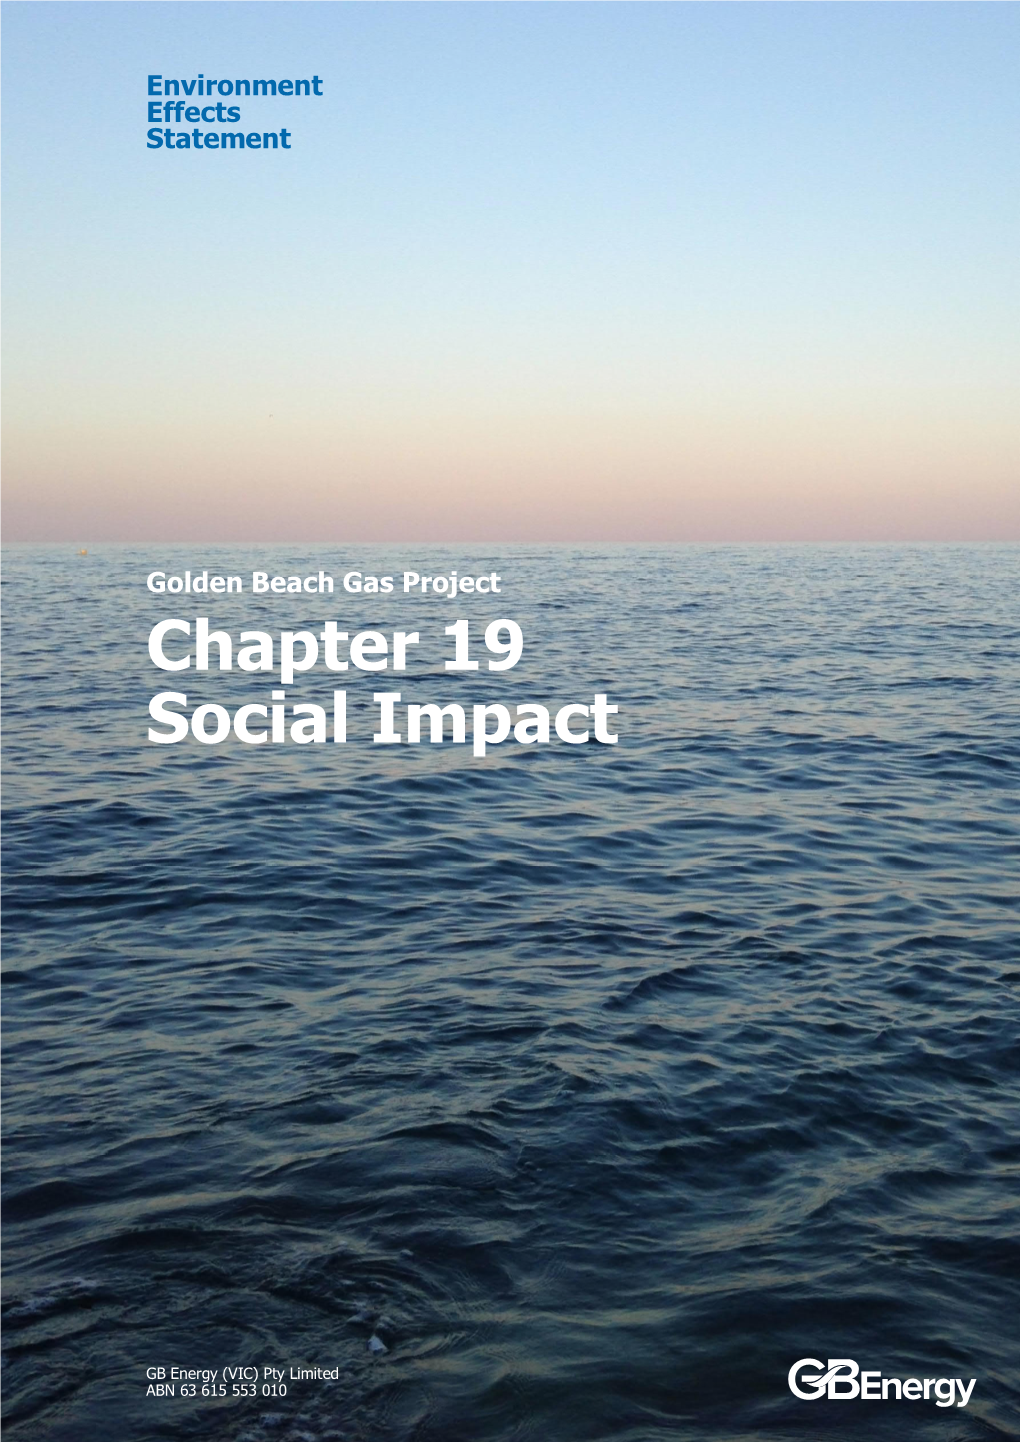 Social Impacts from the Construction, Operation and Decommissioning of the Golden Beach Gas Project (Project)